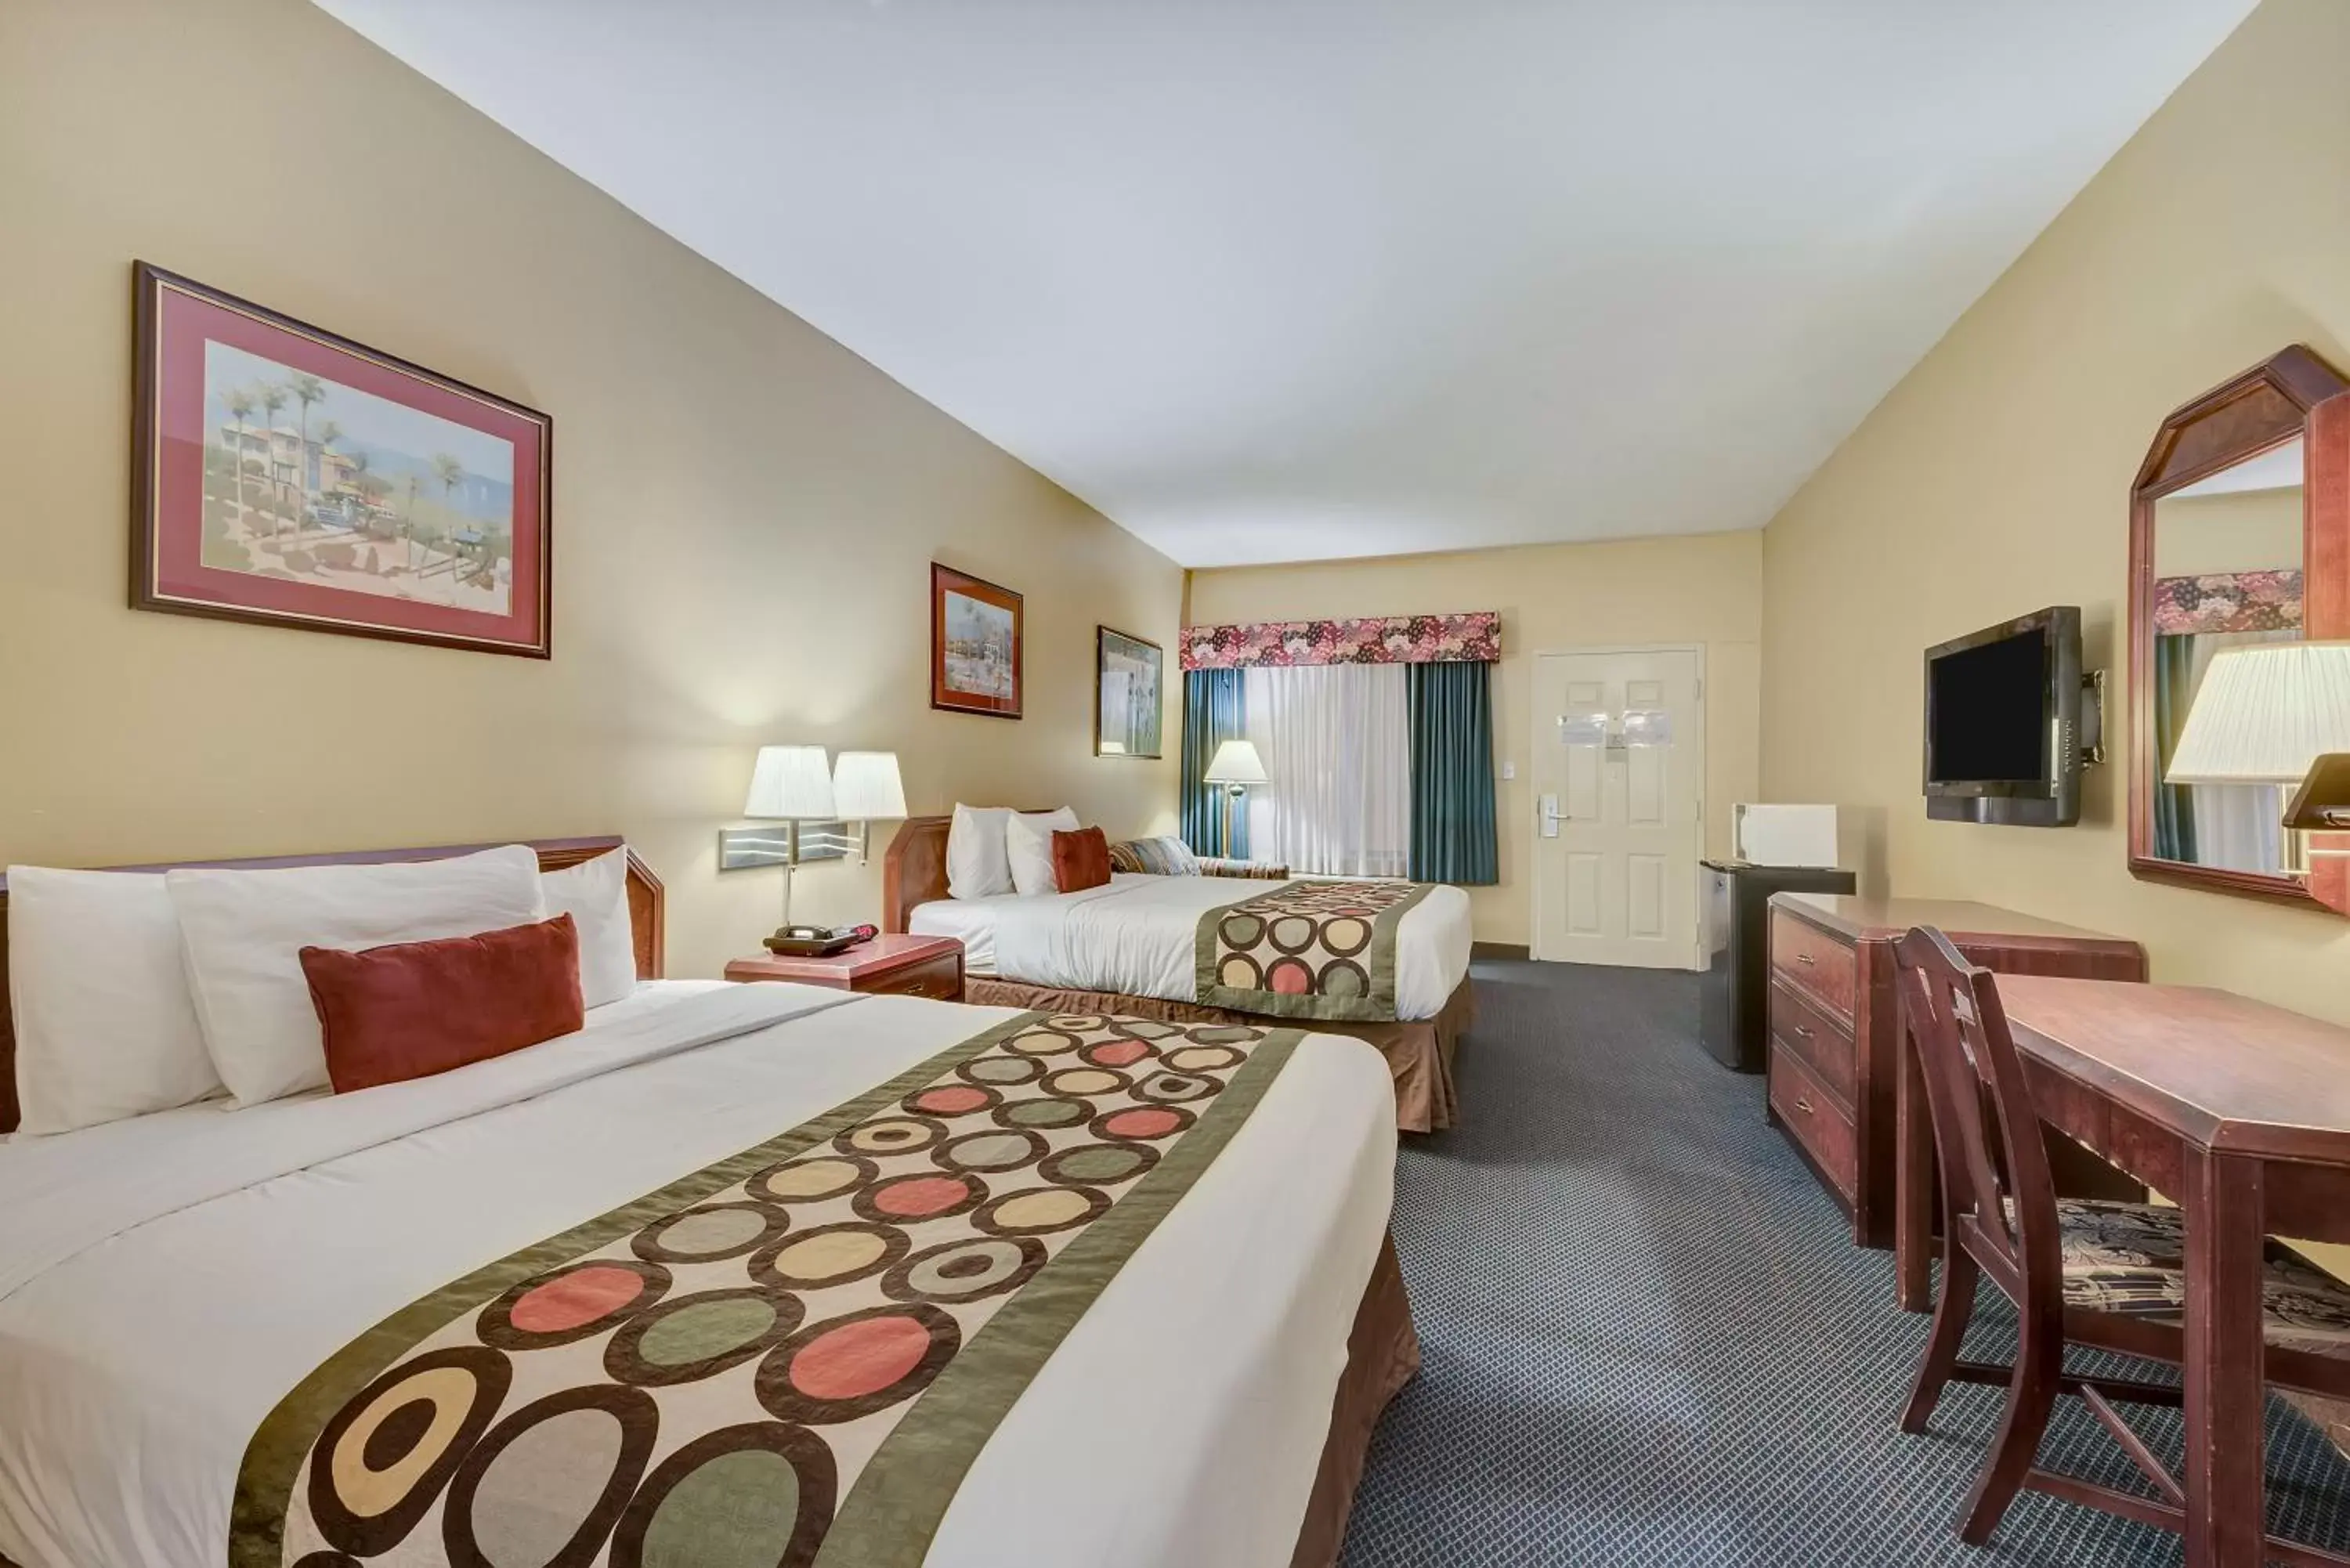 TV and multimedia, Room Photo in Super 8 by Wyndham Weslaco